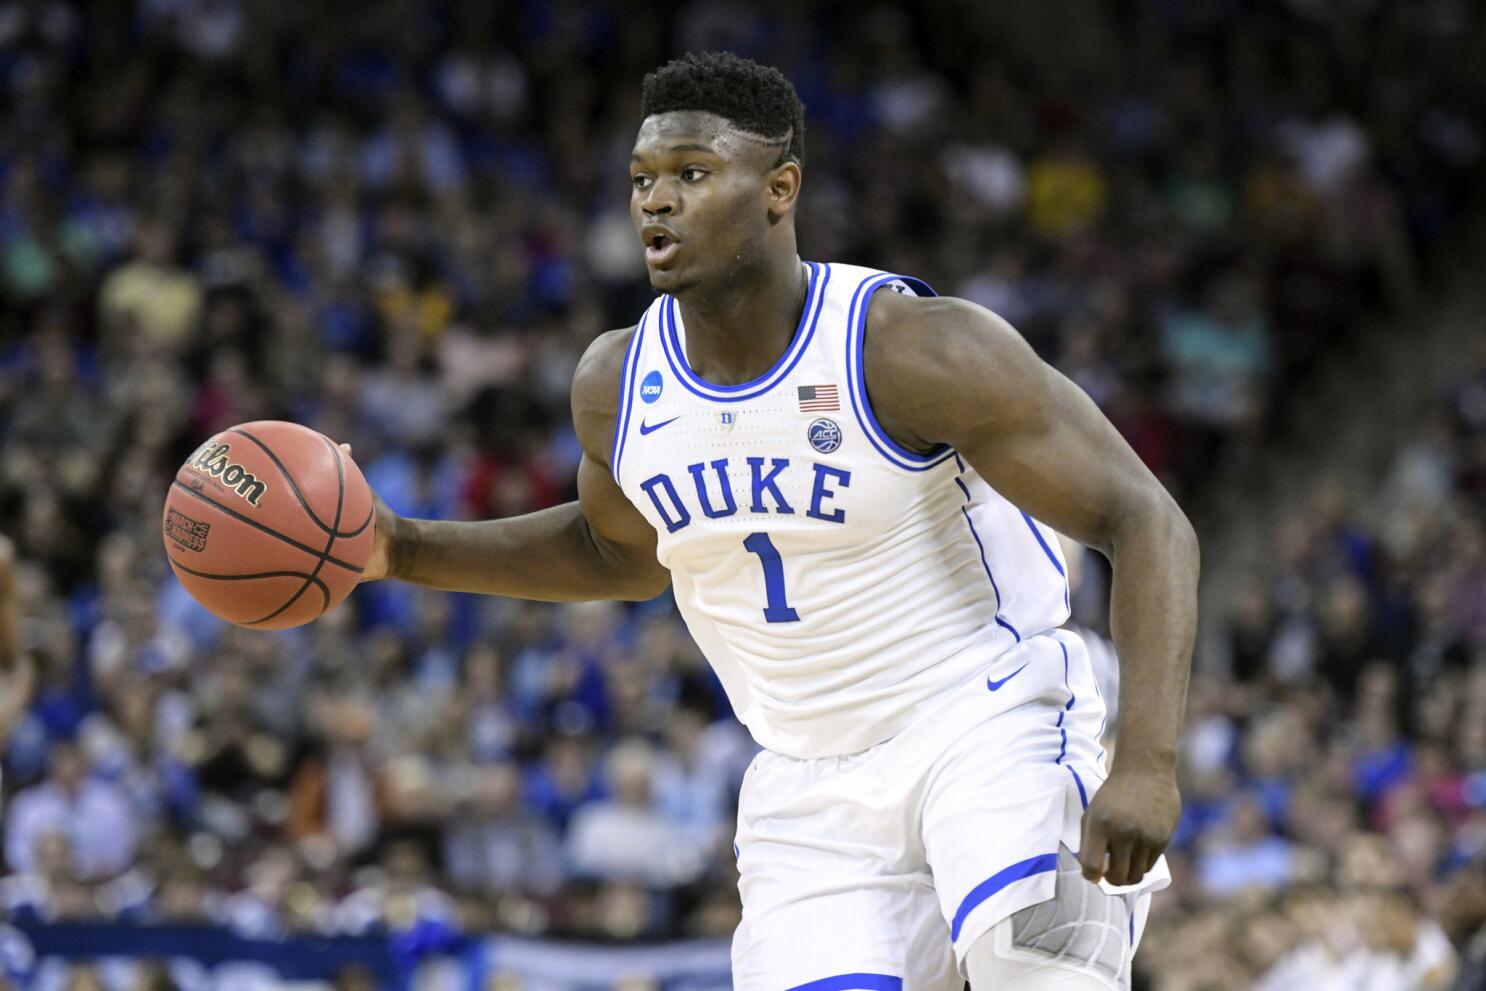 Zion Williamson's Former Agent Claims He Received Illegal Benefits